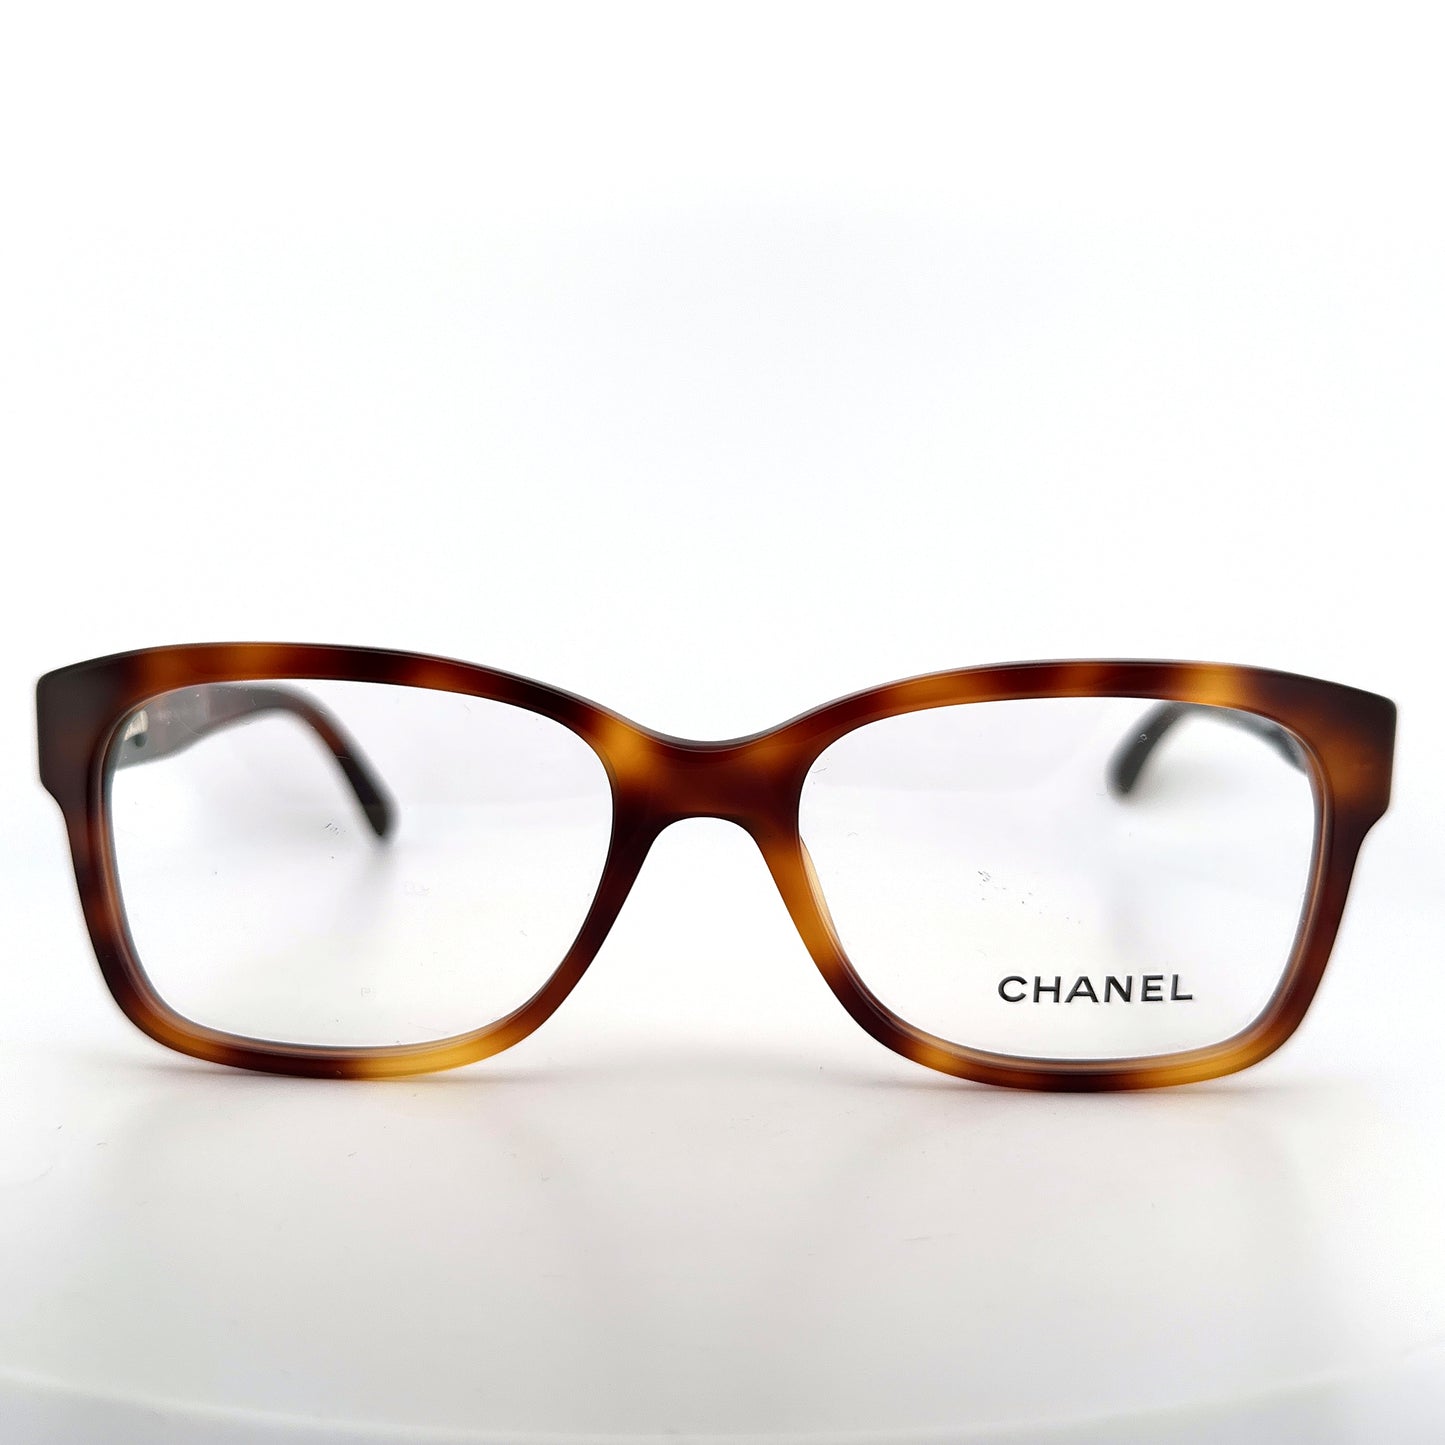 Chanel 3246 Eyeglasses Frames Size 53-17 Made in Italy